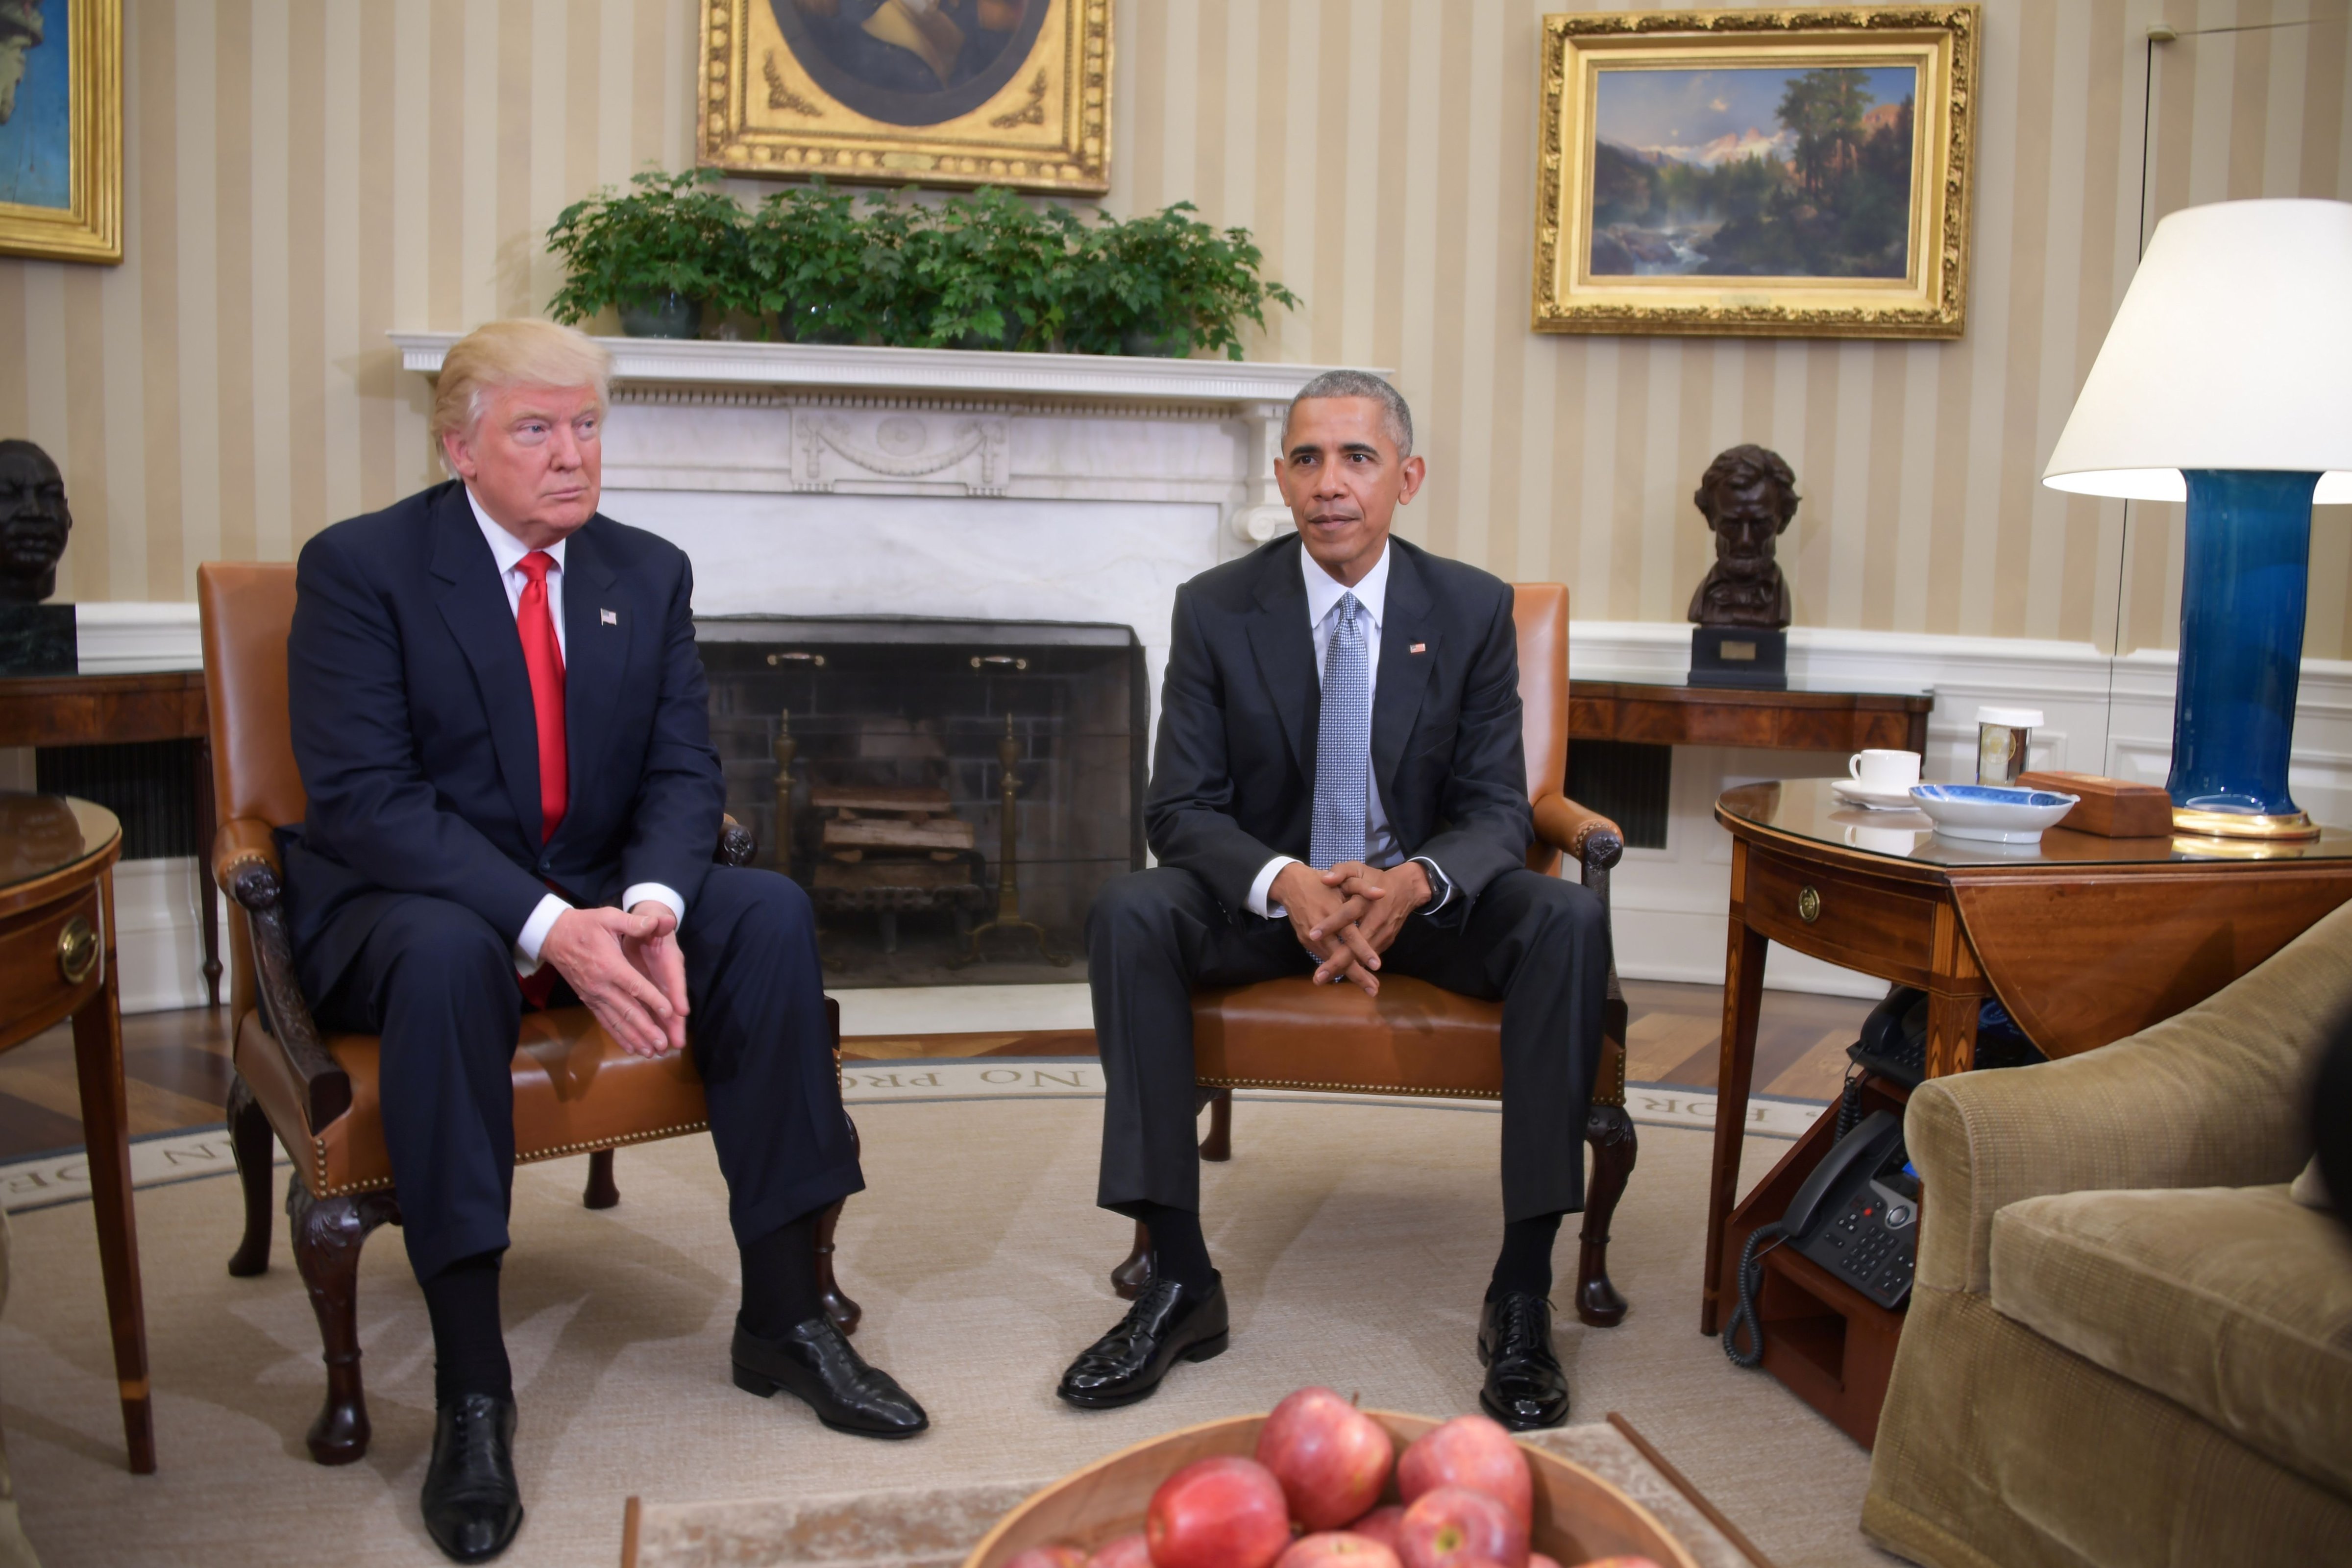 President Barack Obama meets with President-elect Donald Trump in the Oval Office on Nov. 10, 2016. (Jim Watson—AFP/Getty Images)